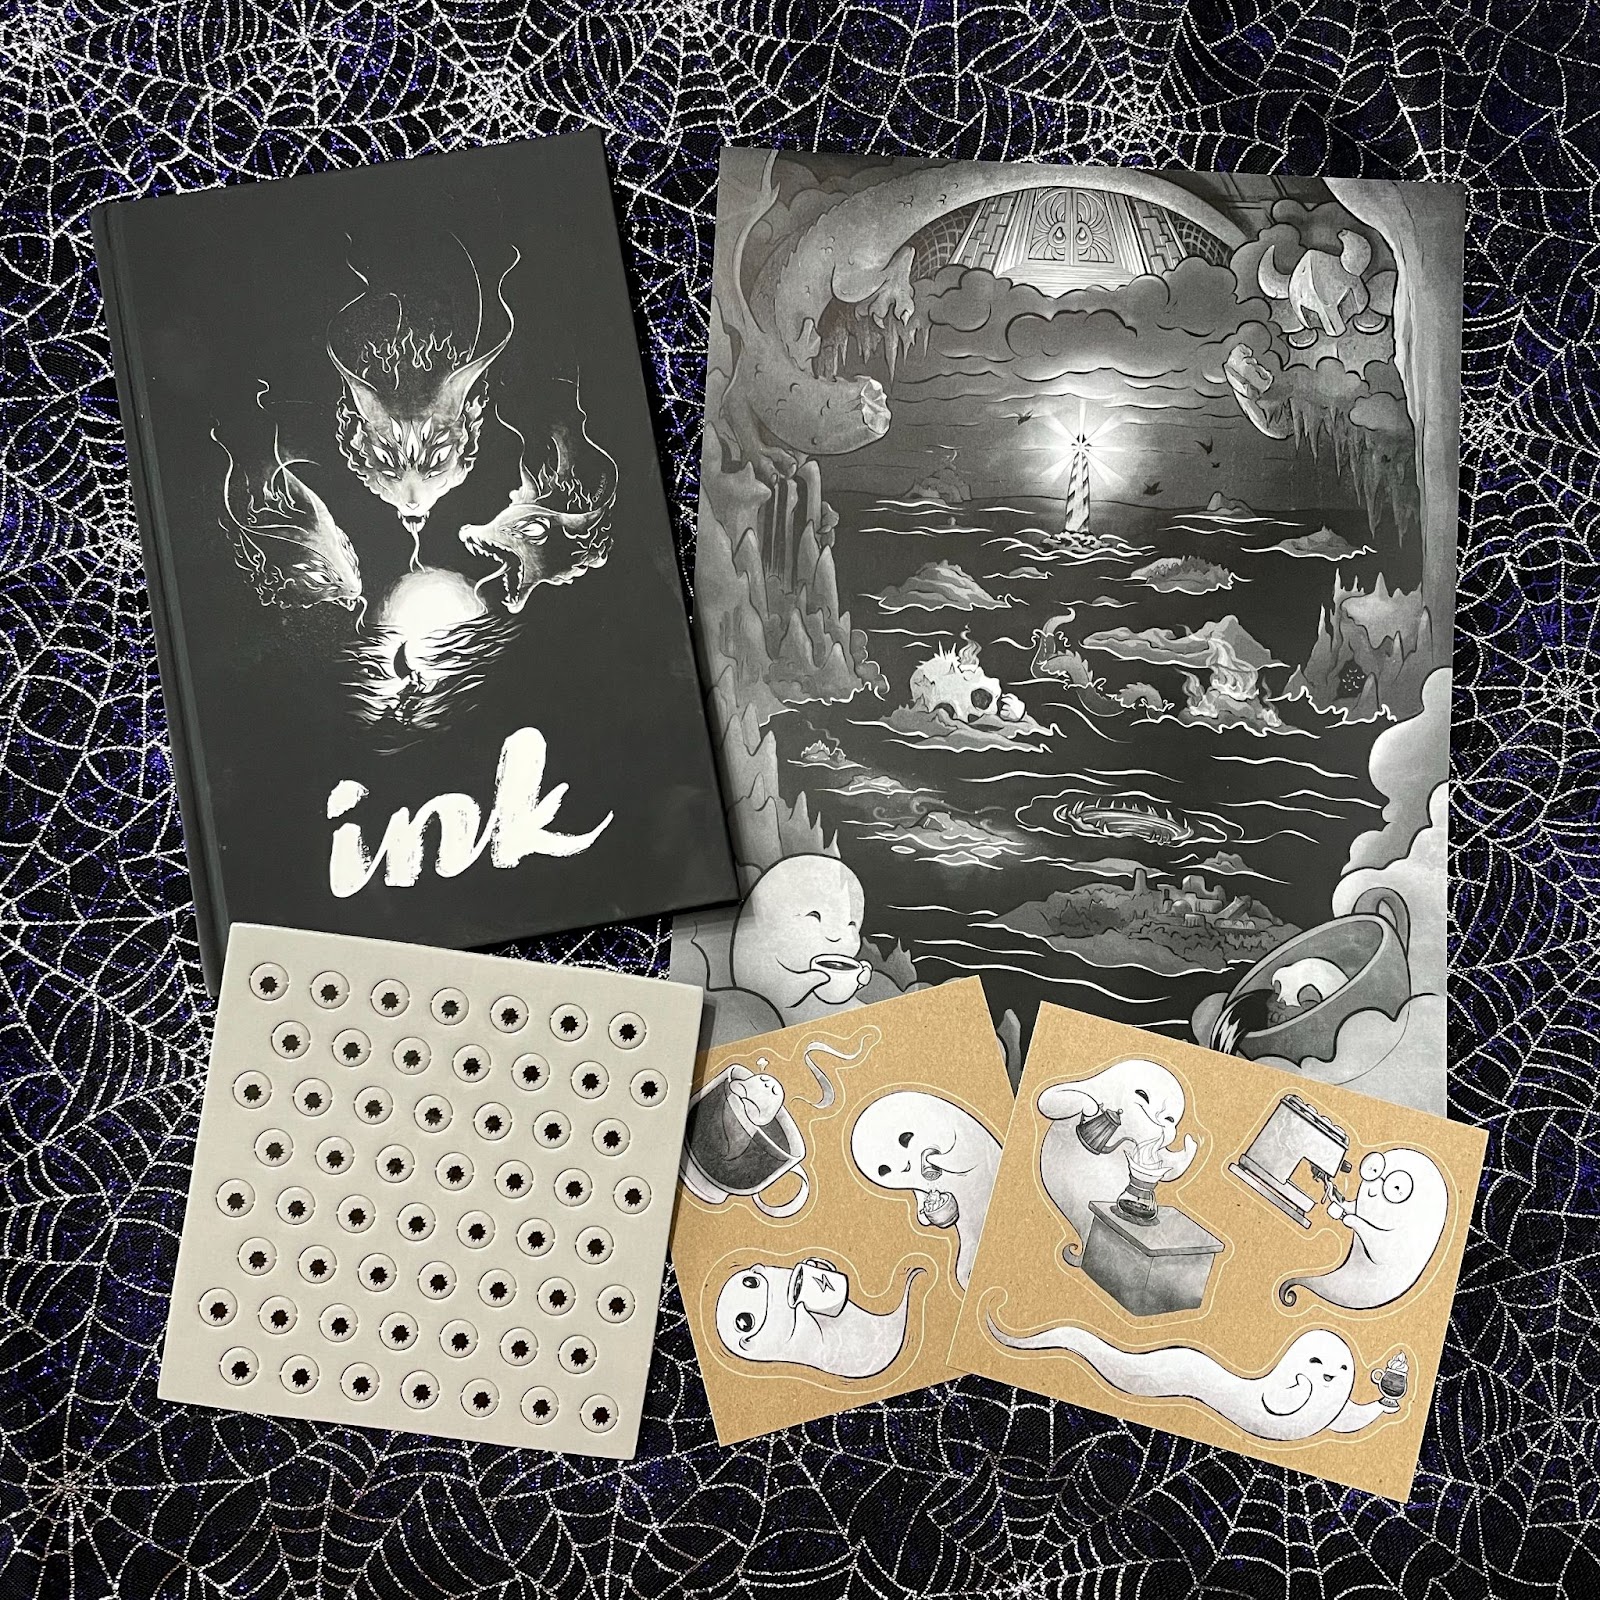 The ink book, map, stickers and tokens on a spiderweb cloth